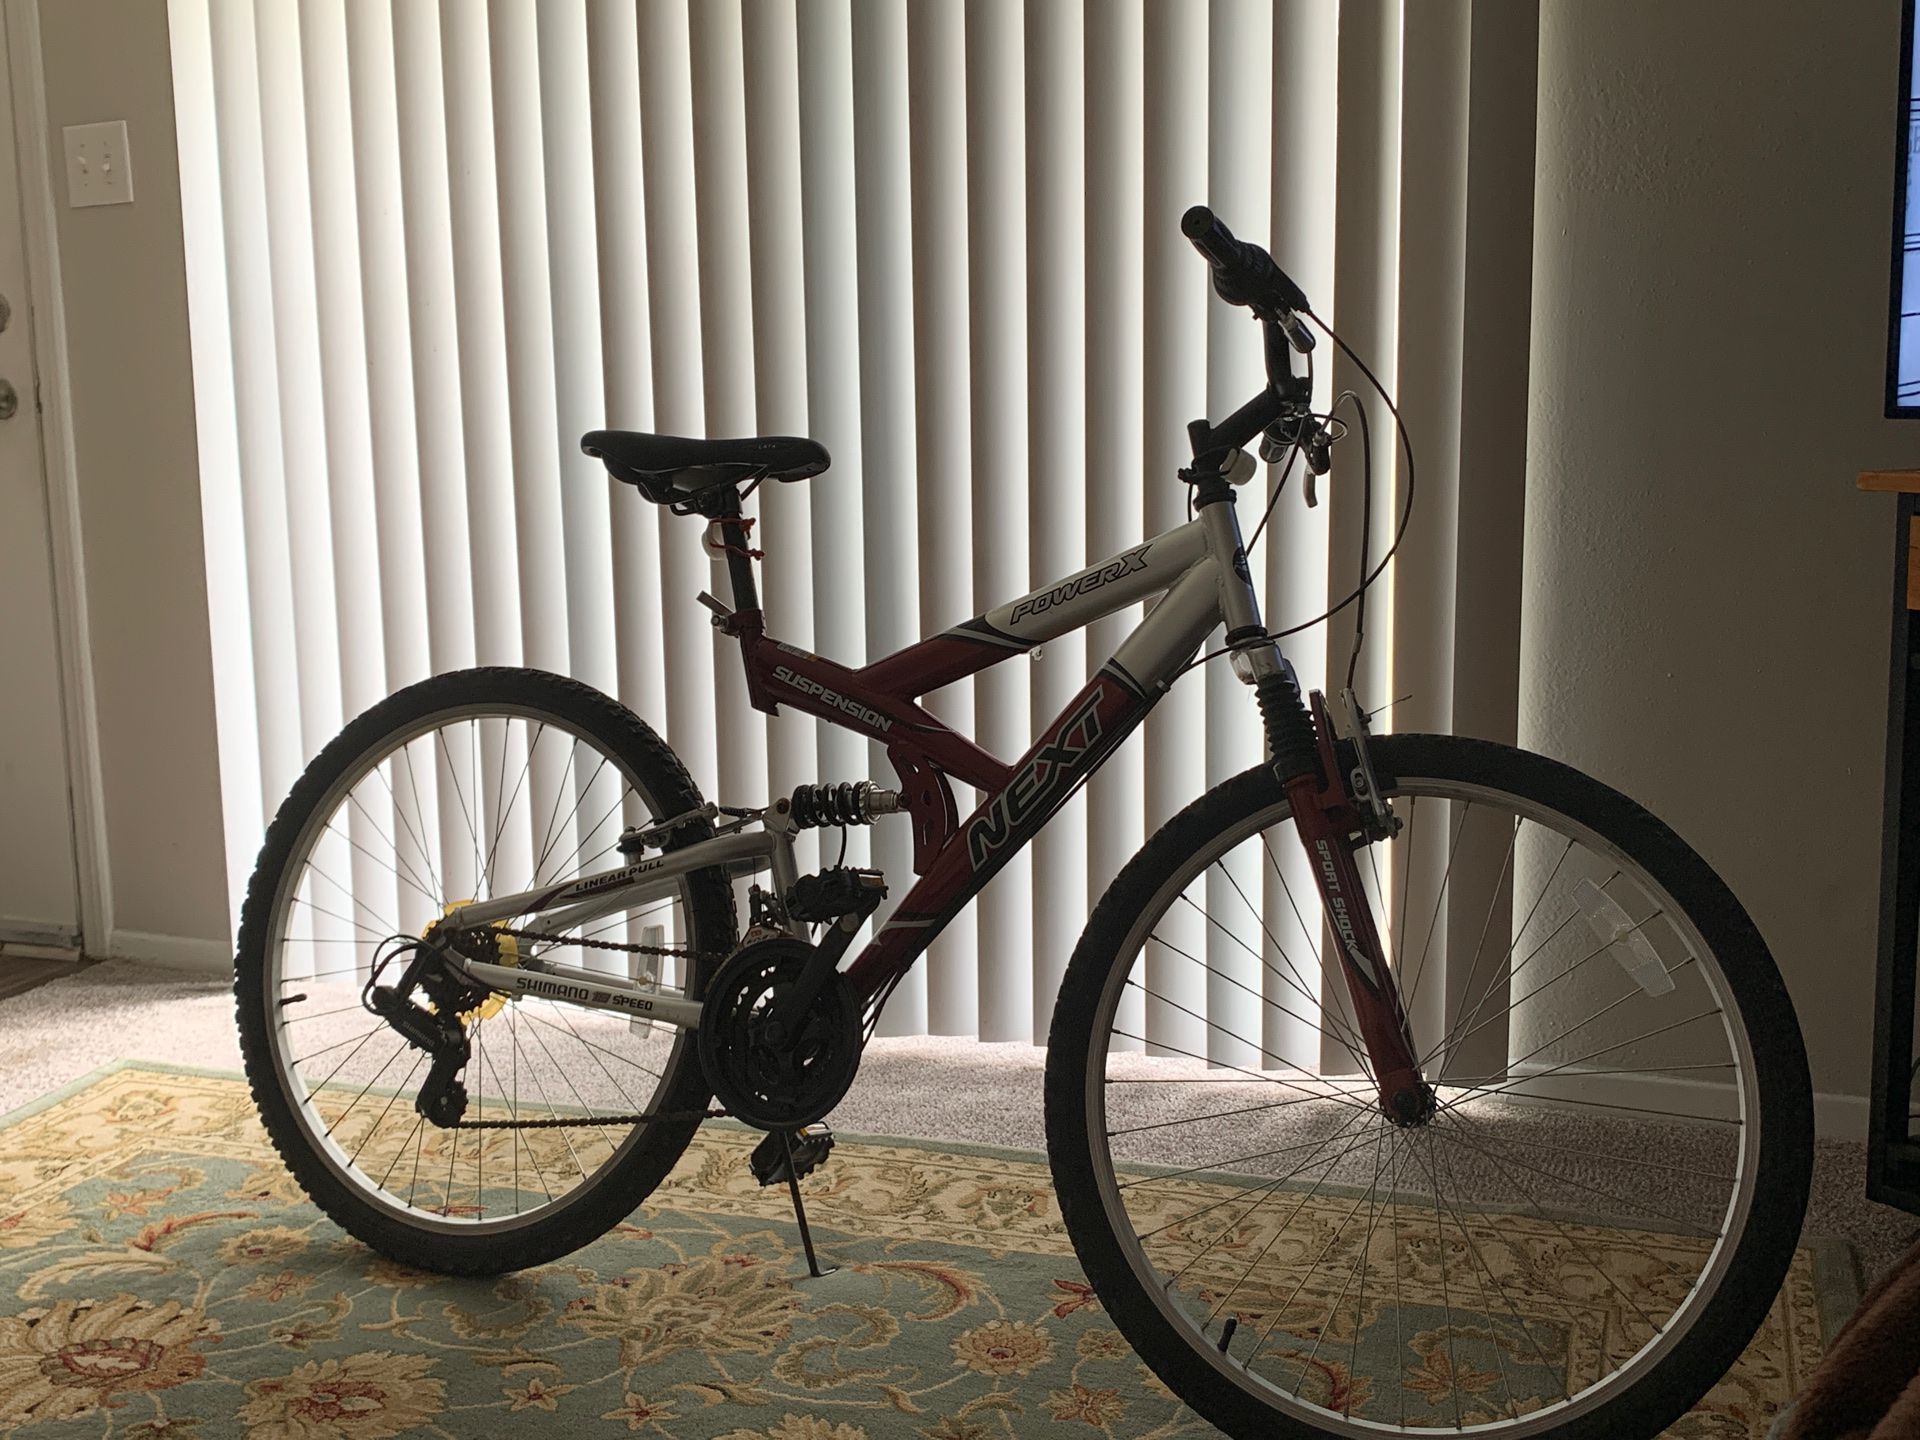 Excellent used bike for sale $80